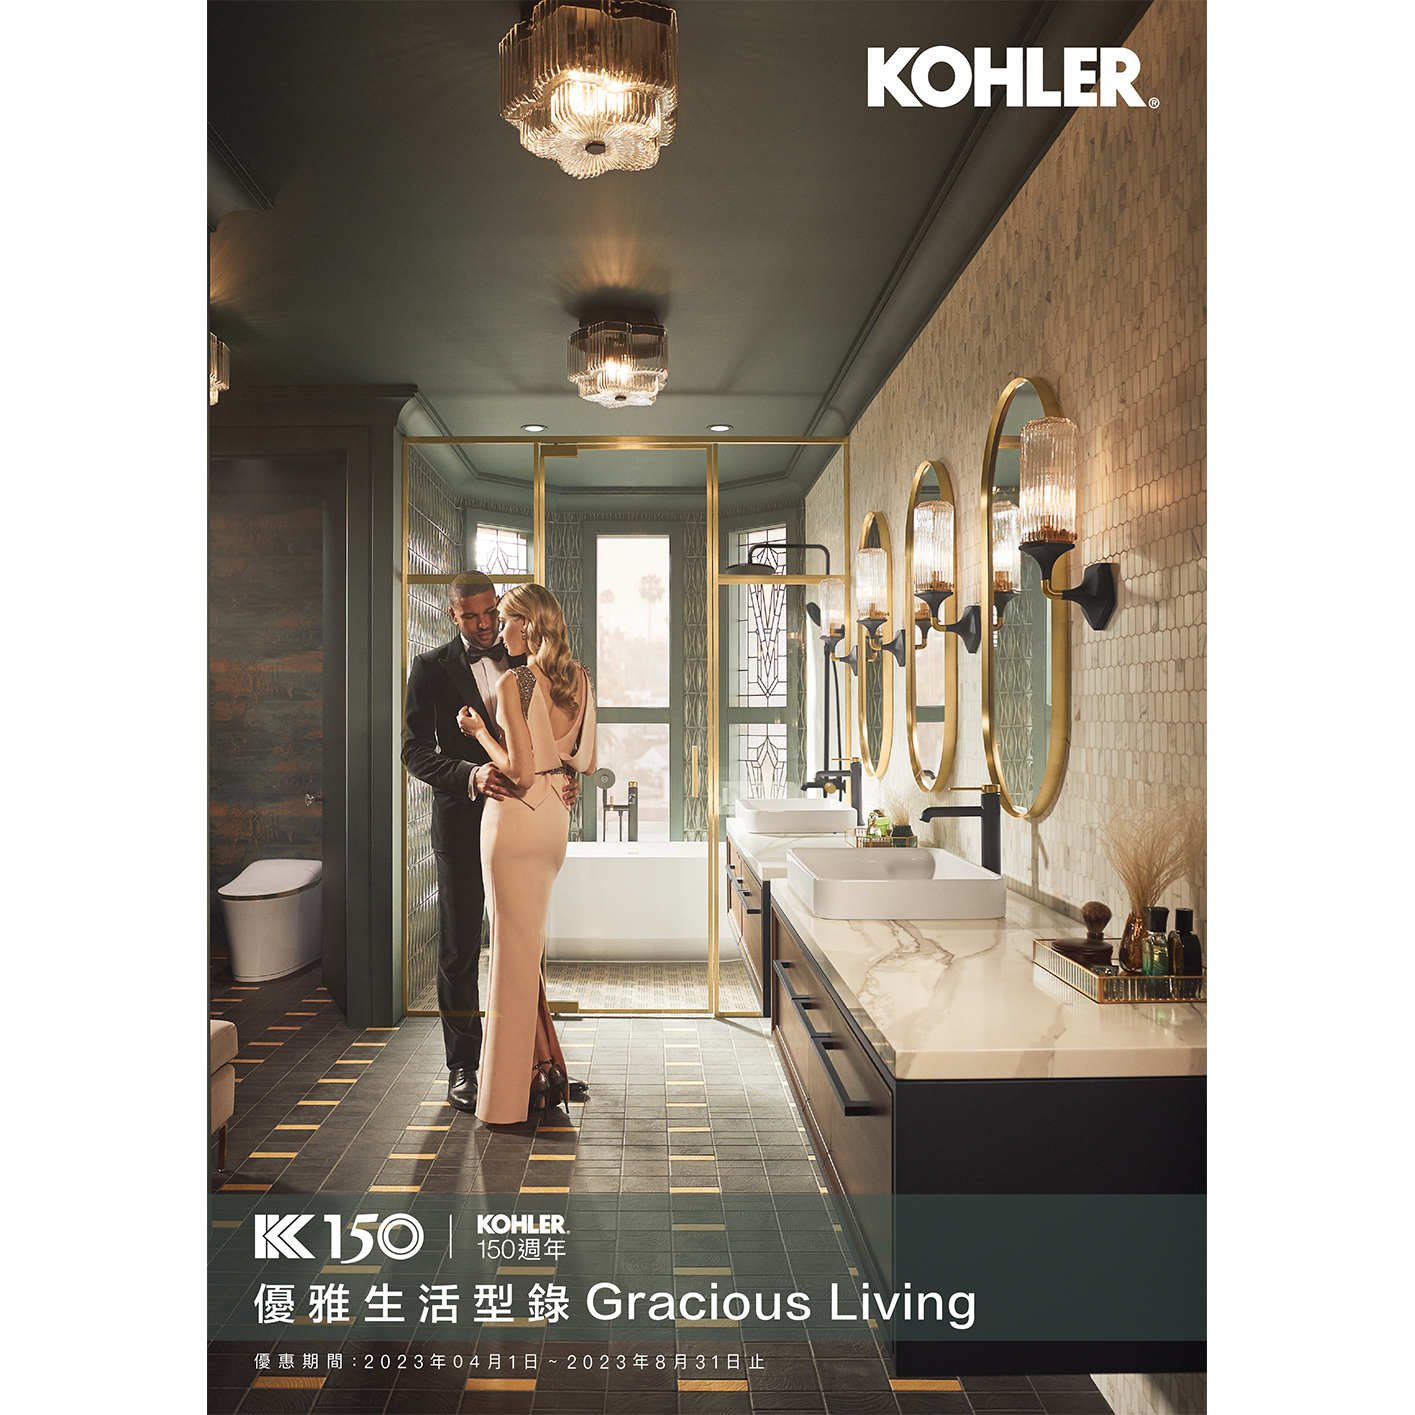 You are currently viewing KOHLER最新商品促銷優惠－2023年04月01日~08月31日止